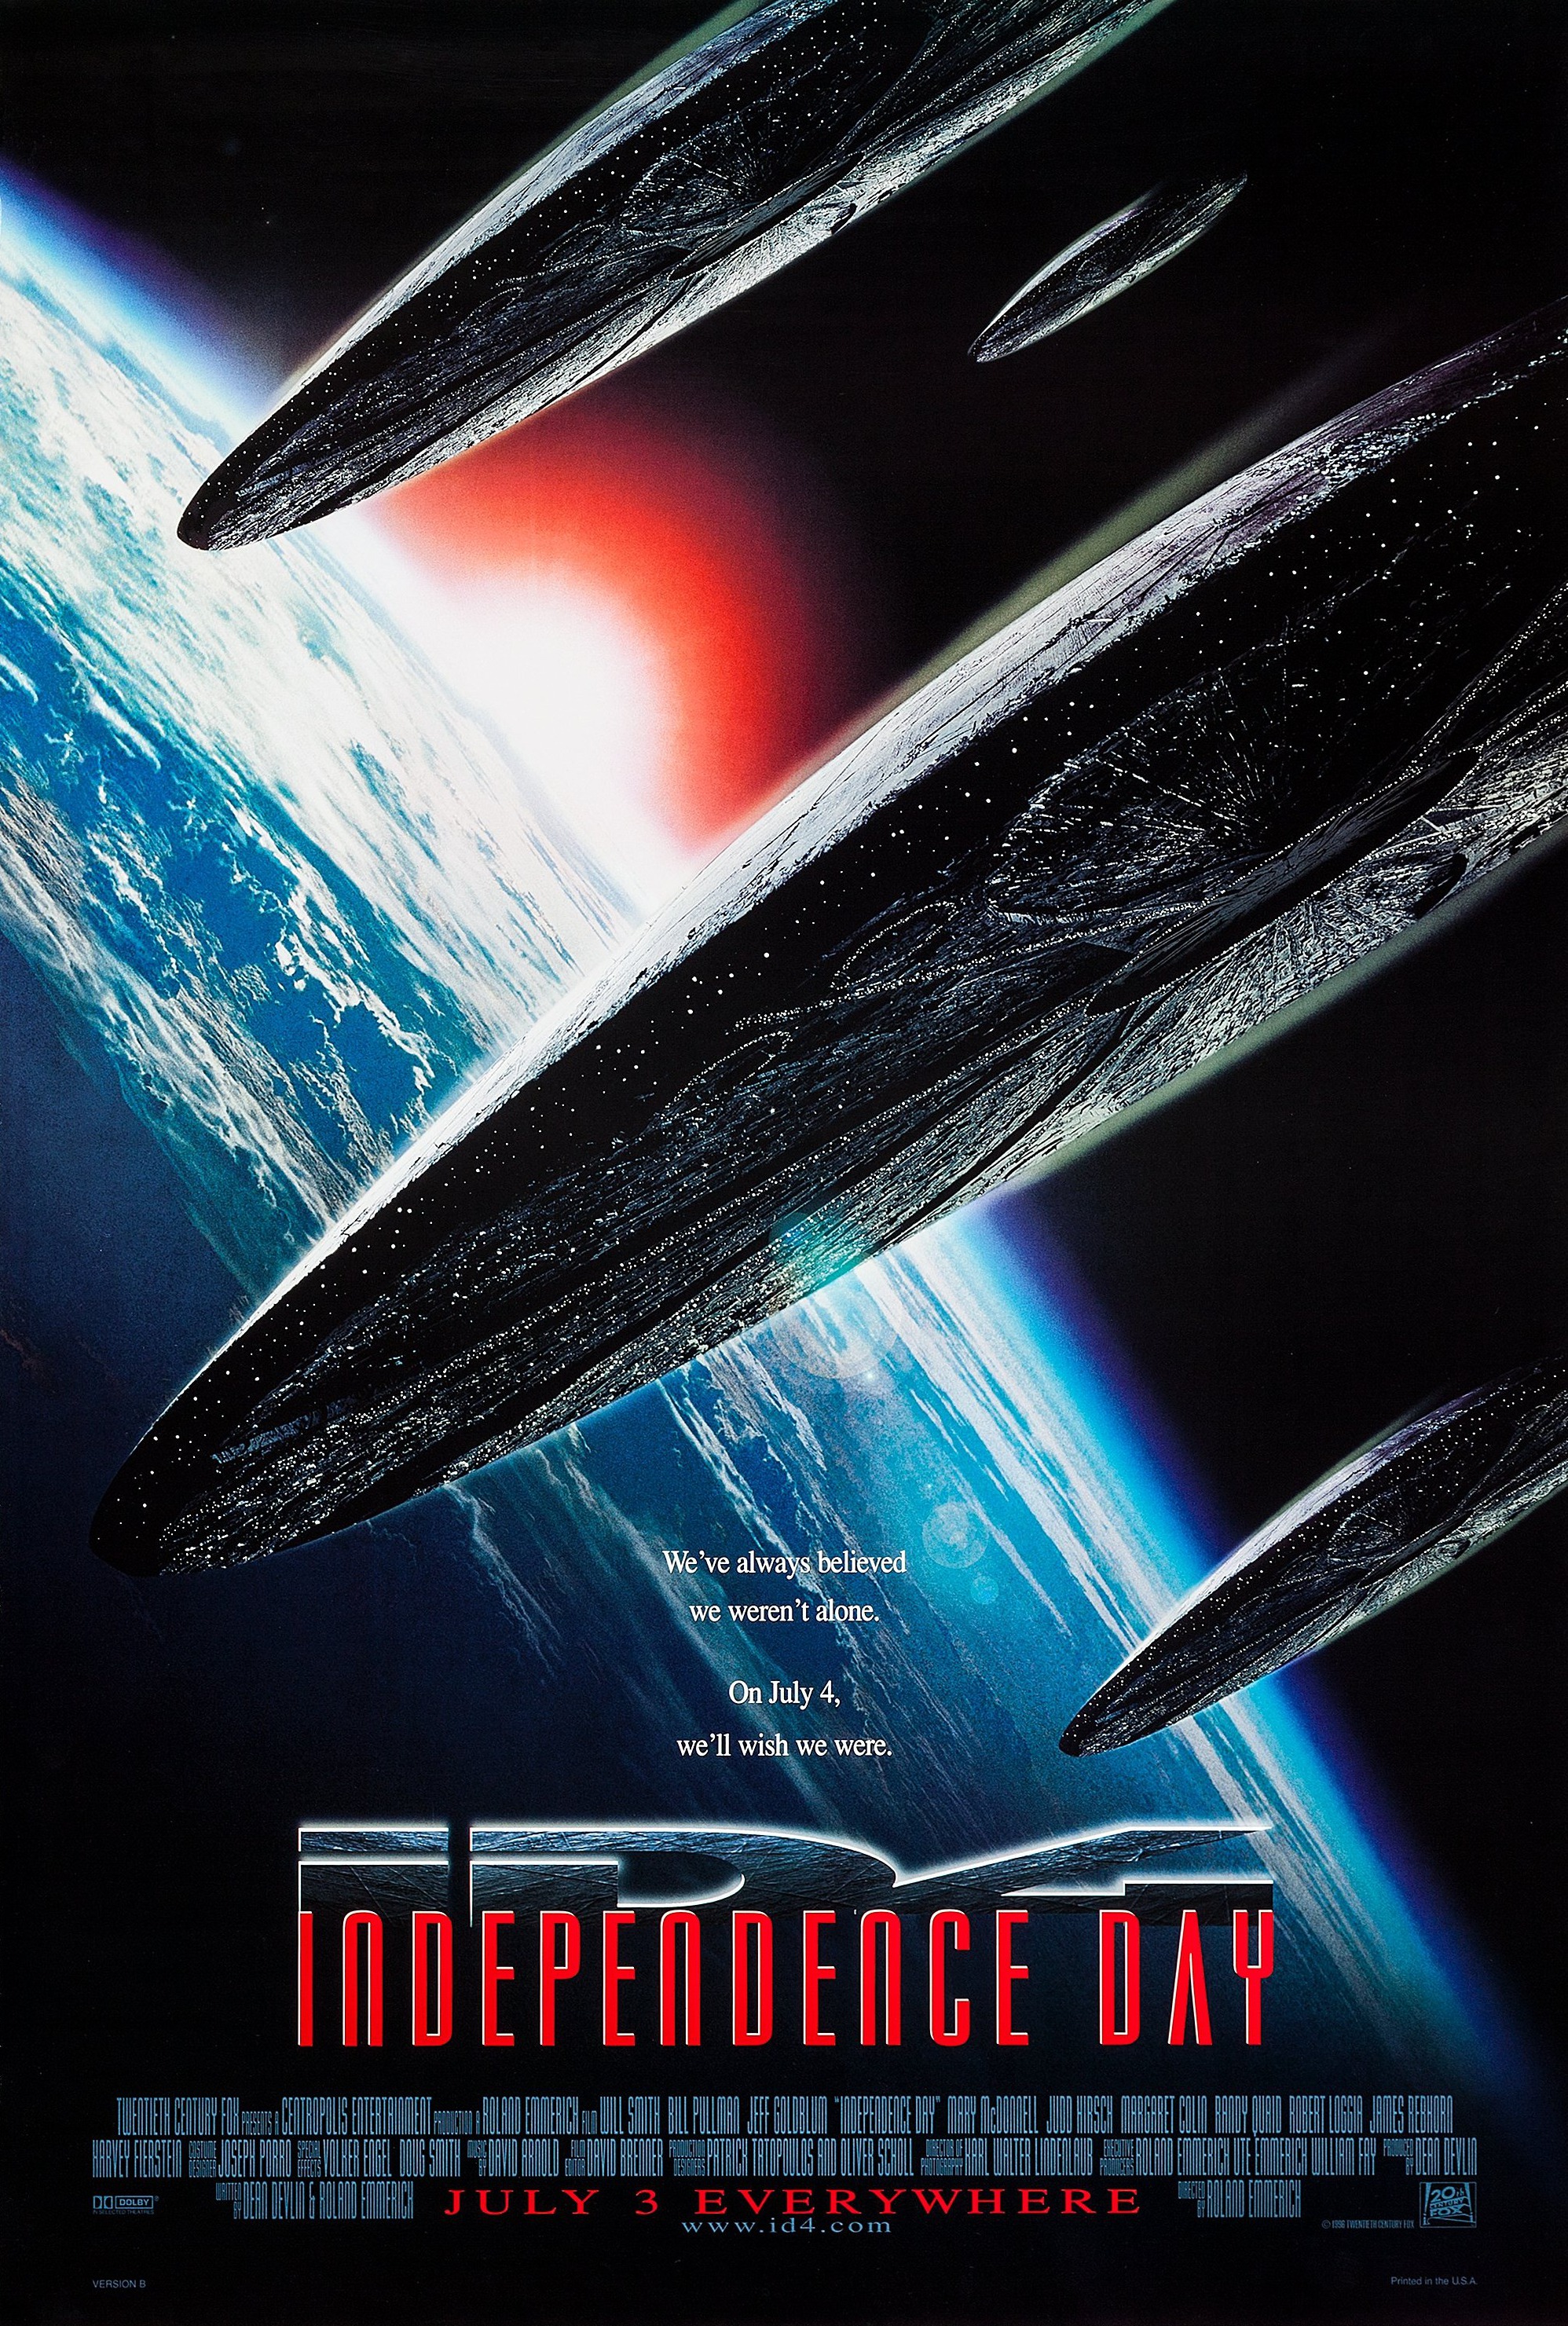 Mega Sized Movie Poster Image for Independence Day (#2 of 4)